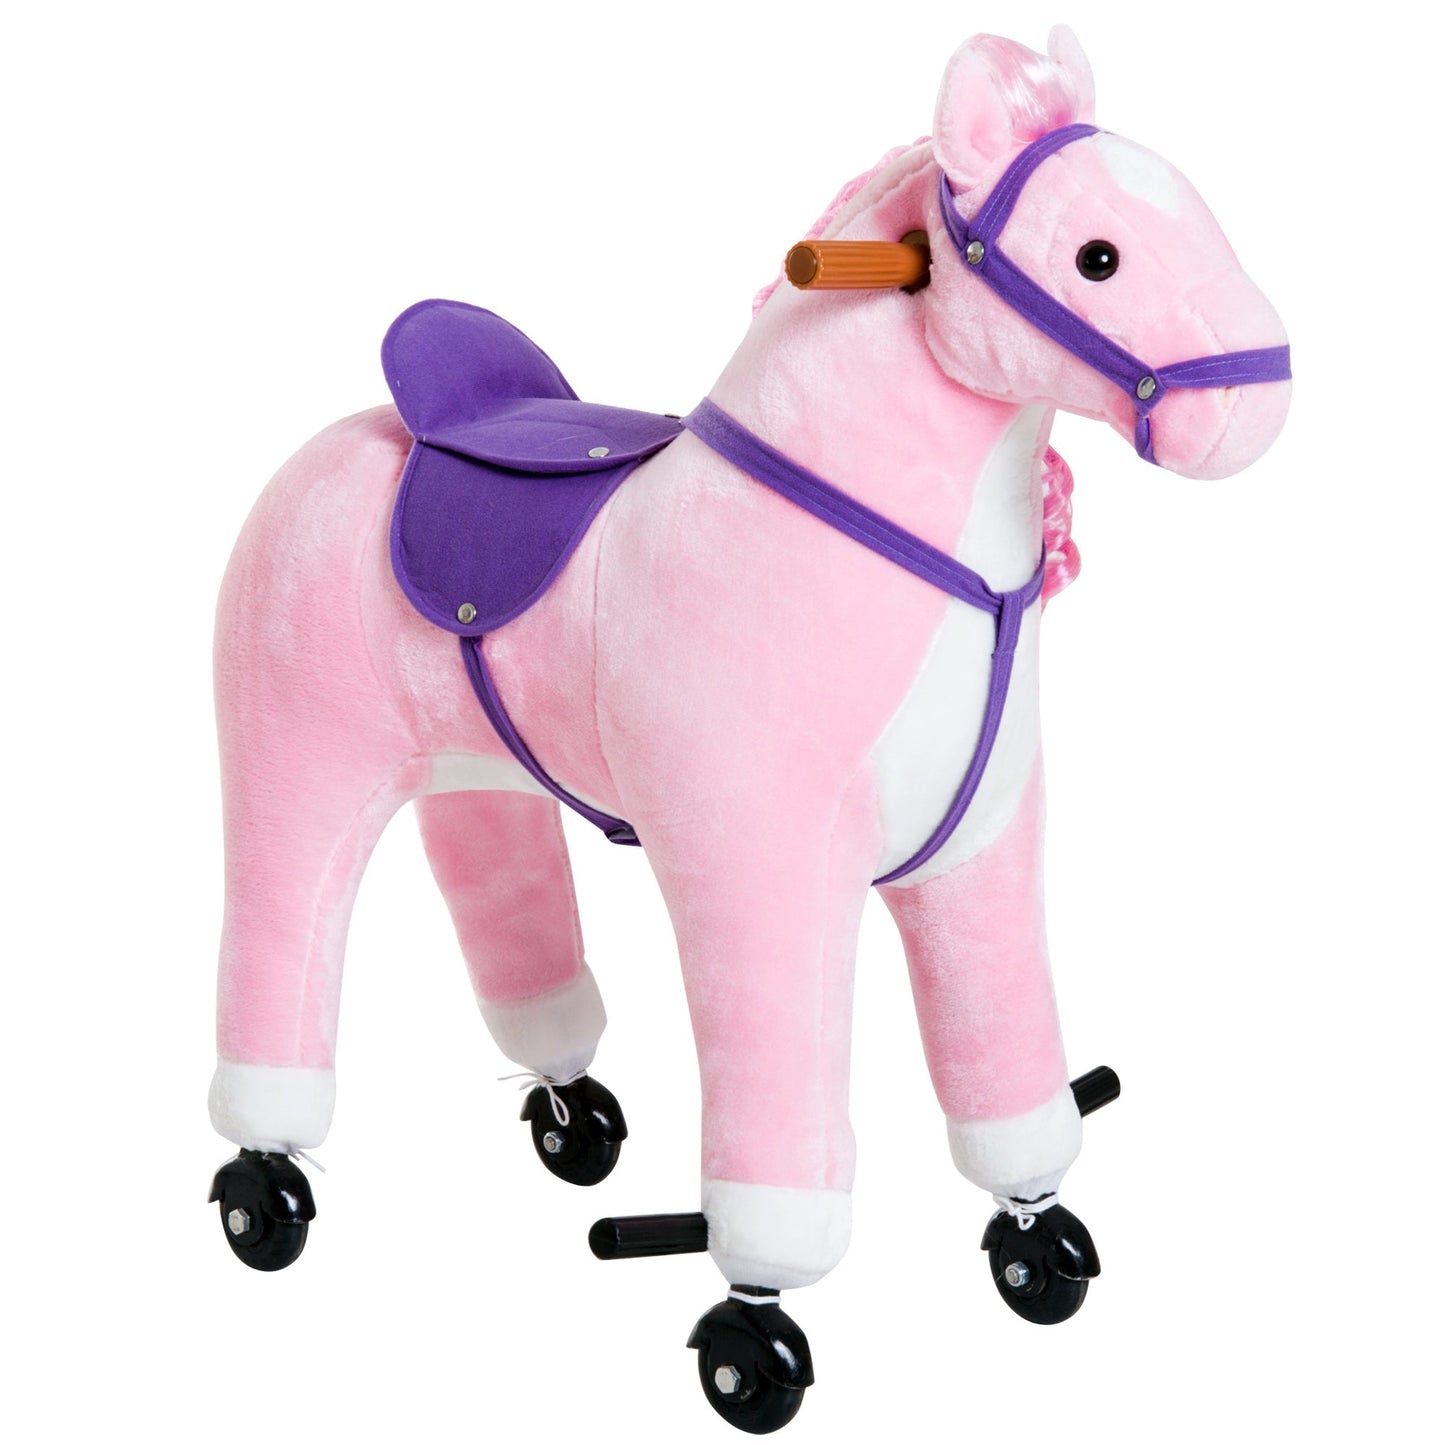 Kids Rocking Horse, Large Walking Ride on Toy for Toddlers 3 year old, Baby Plush Animal Rocker with Sound and Wheel, Pink at Gallery Canada